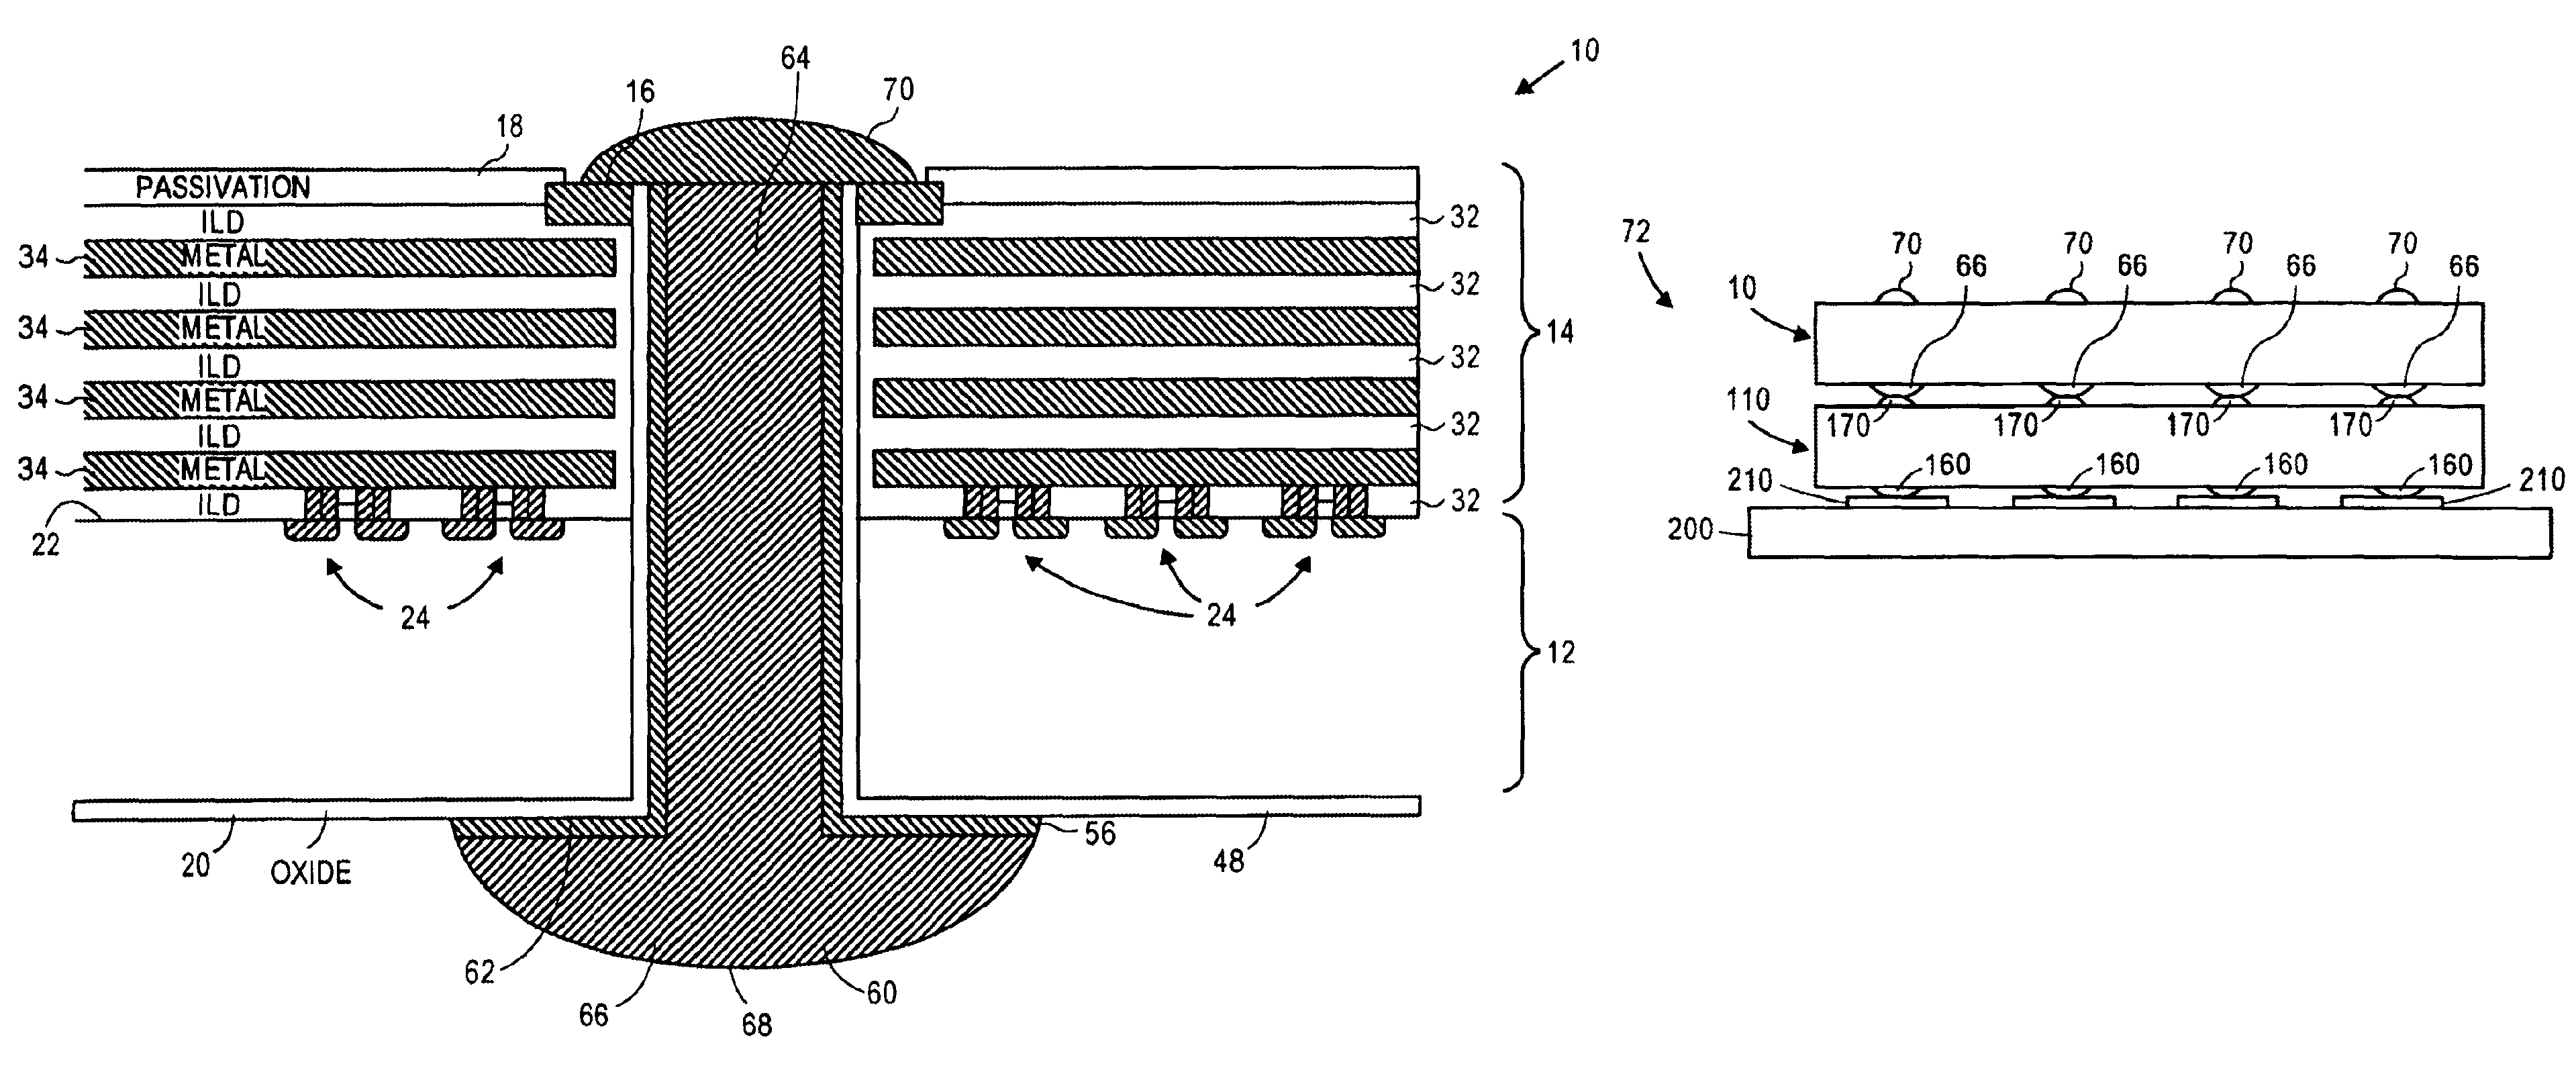 Integrated circuit die and an electronic assembly having a three-dimensional interconnection scheme